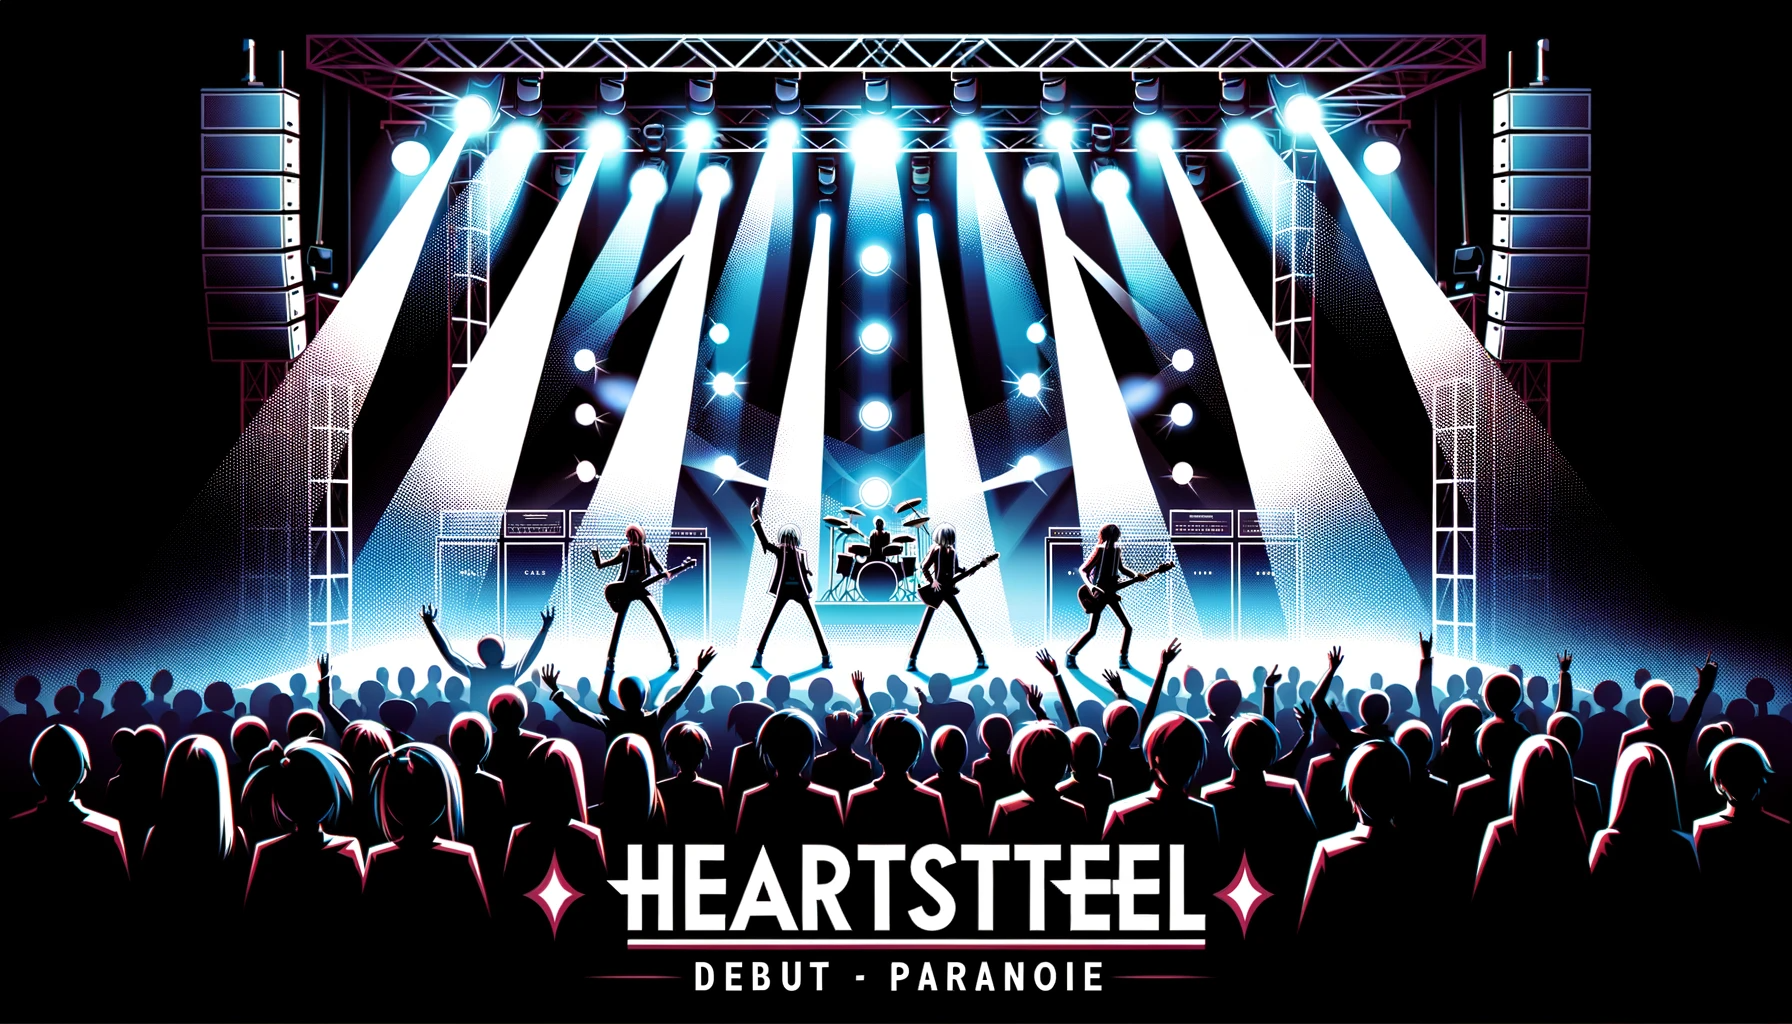 Photo of a stage with spotlights shining down, showcasing a virtual holographic band named HEARTSTEEL with the silhouettes of the characters Ezreal, Kayn, Aphelios, Yone, K’Sante, and Sett. A large screen in the background displays the logo of 'League of Legends' and 'HEARTSTEEL'.